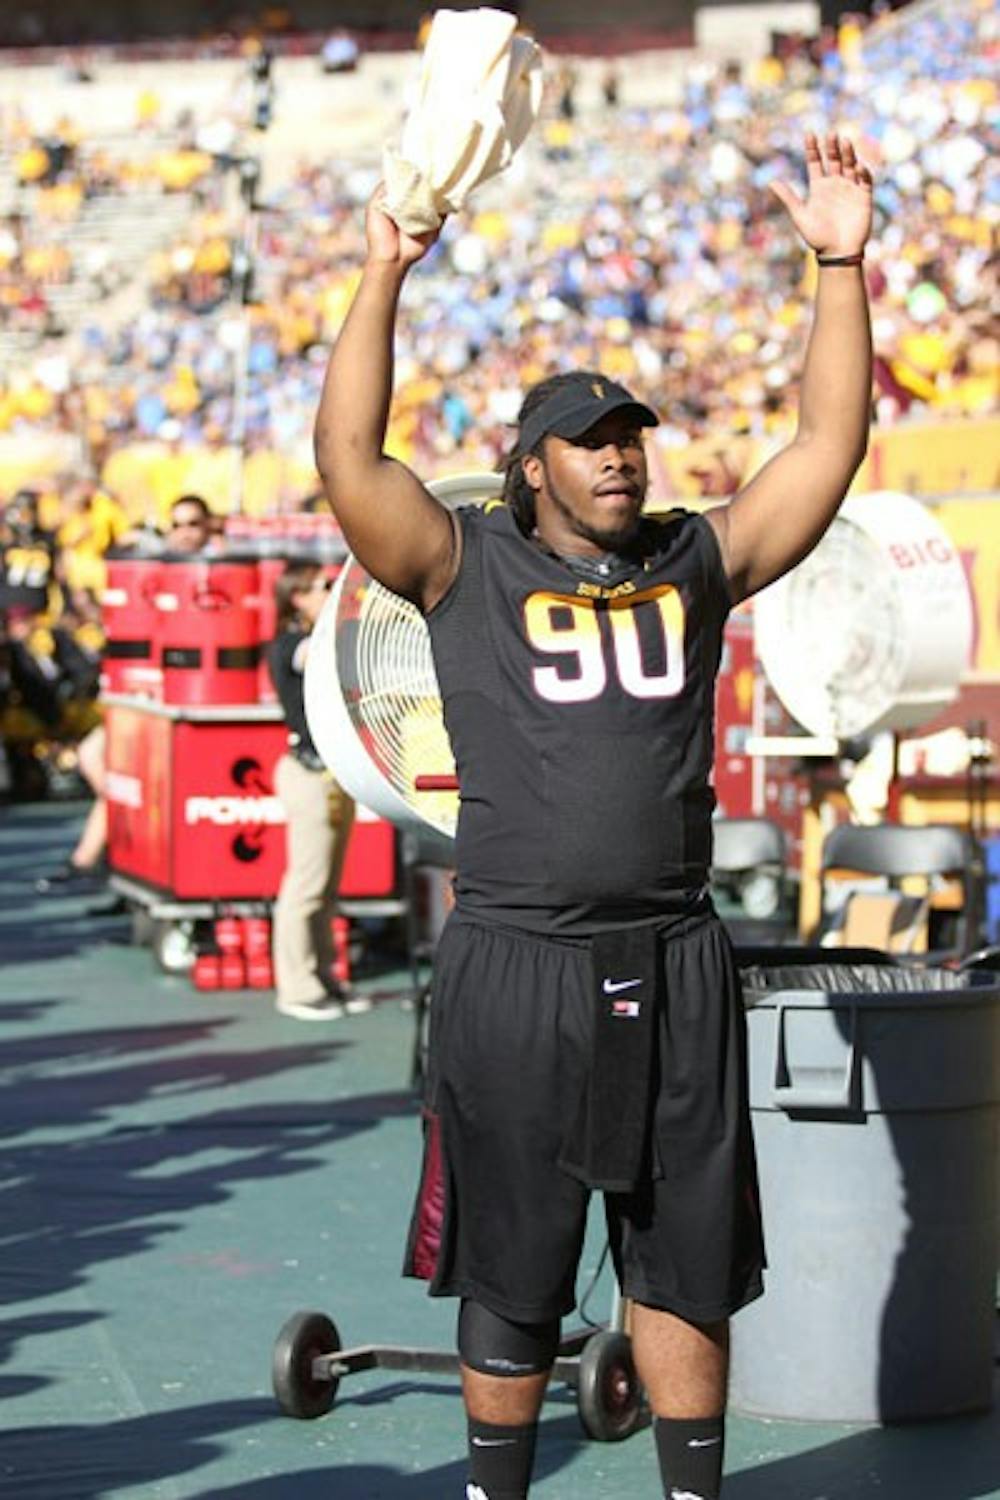 Redshirt junior defensive tackle Will Sutton cheers on his teammates from the ASU sideline during the Sun Devils’ 45-43 loss to UCLA on Oct. 27. (Photo by Kyle Newman)
